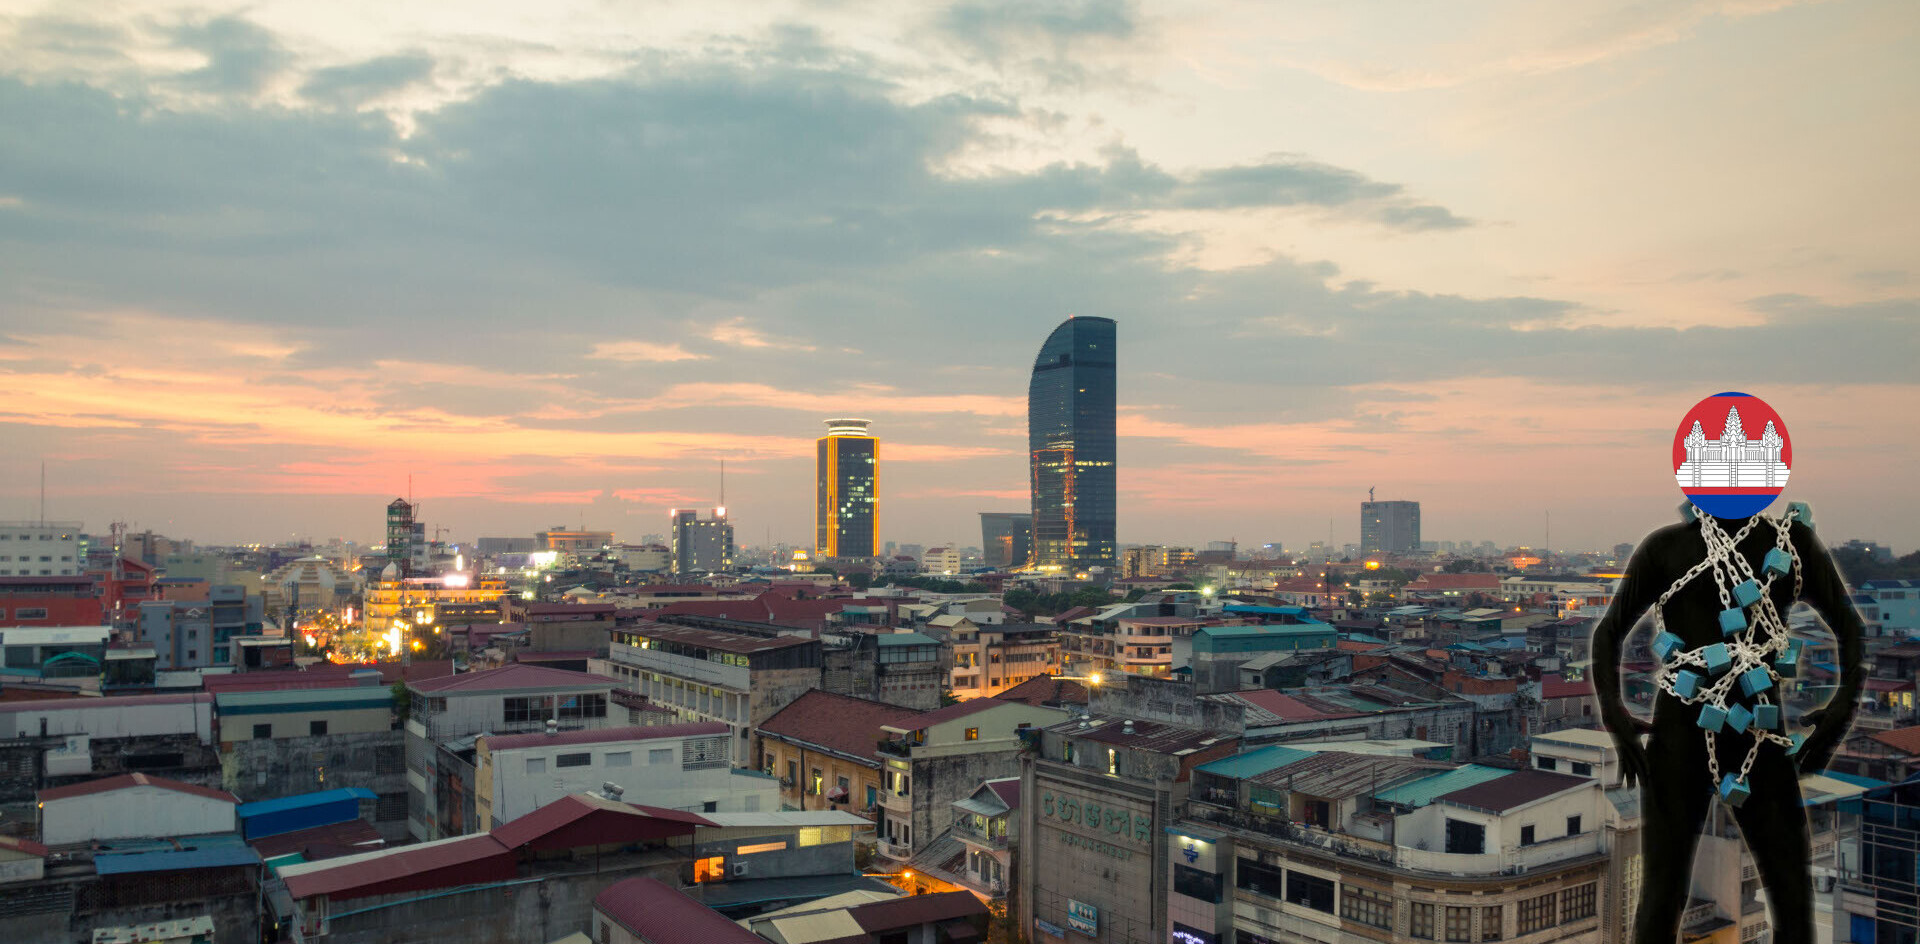 Cambodia just months away from launching its own central bank digital currency